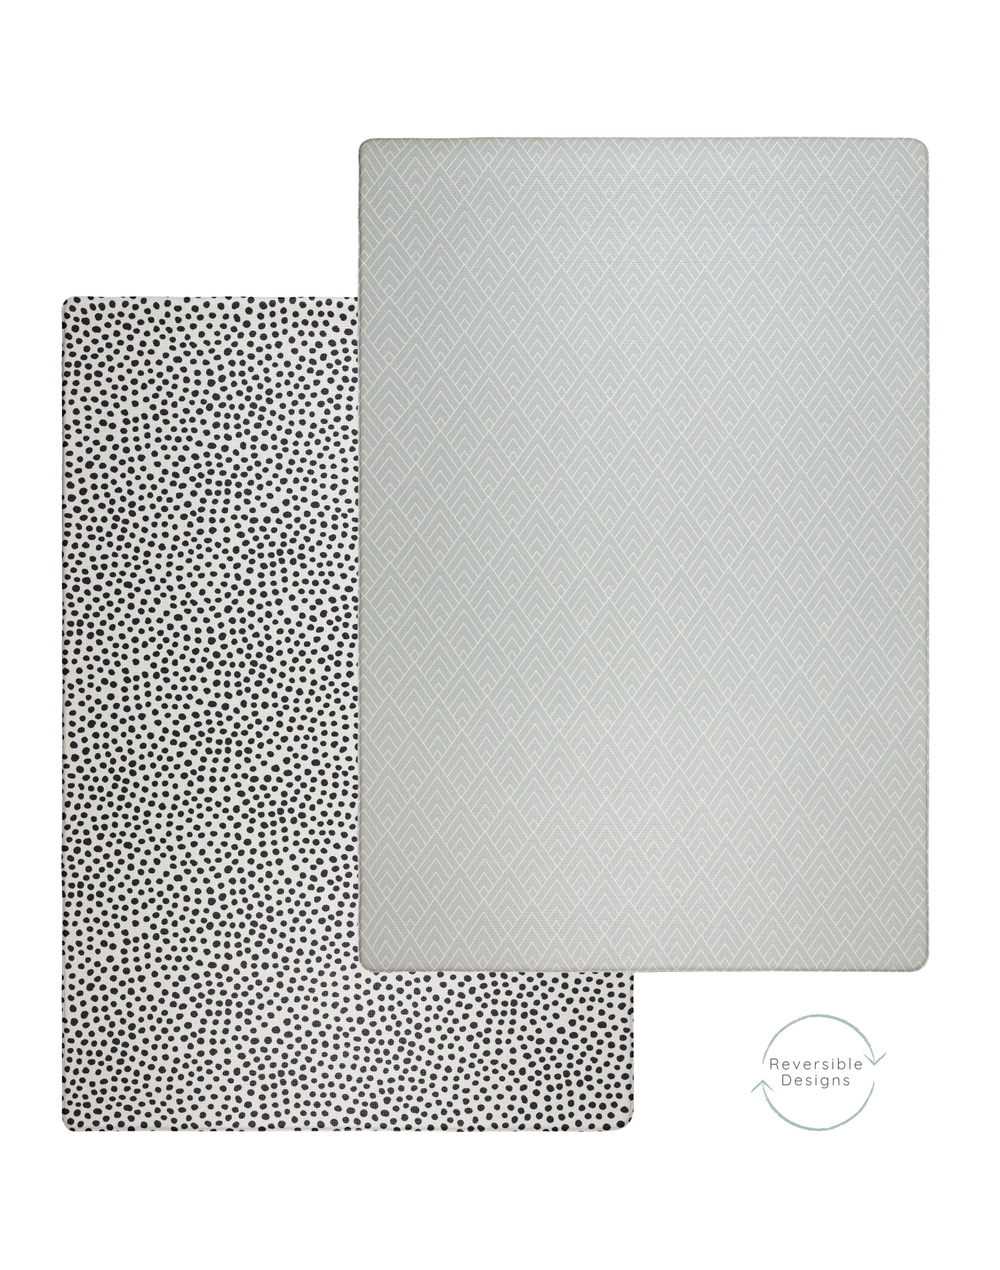 Large size reversible playmat with grey and monochromatic design ideal to unroll in the family home and flip to the reverse side for a new look